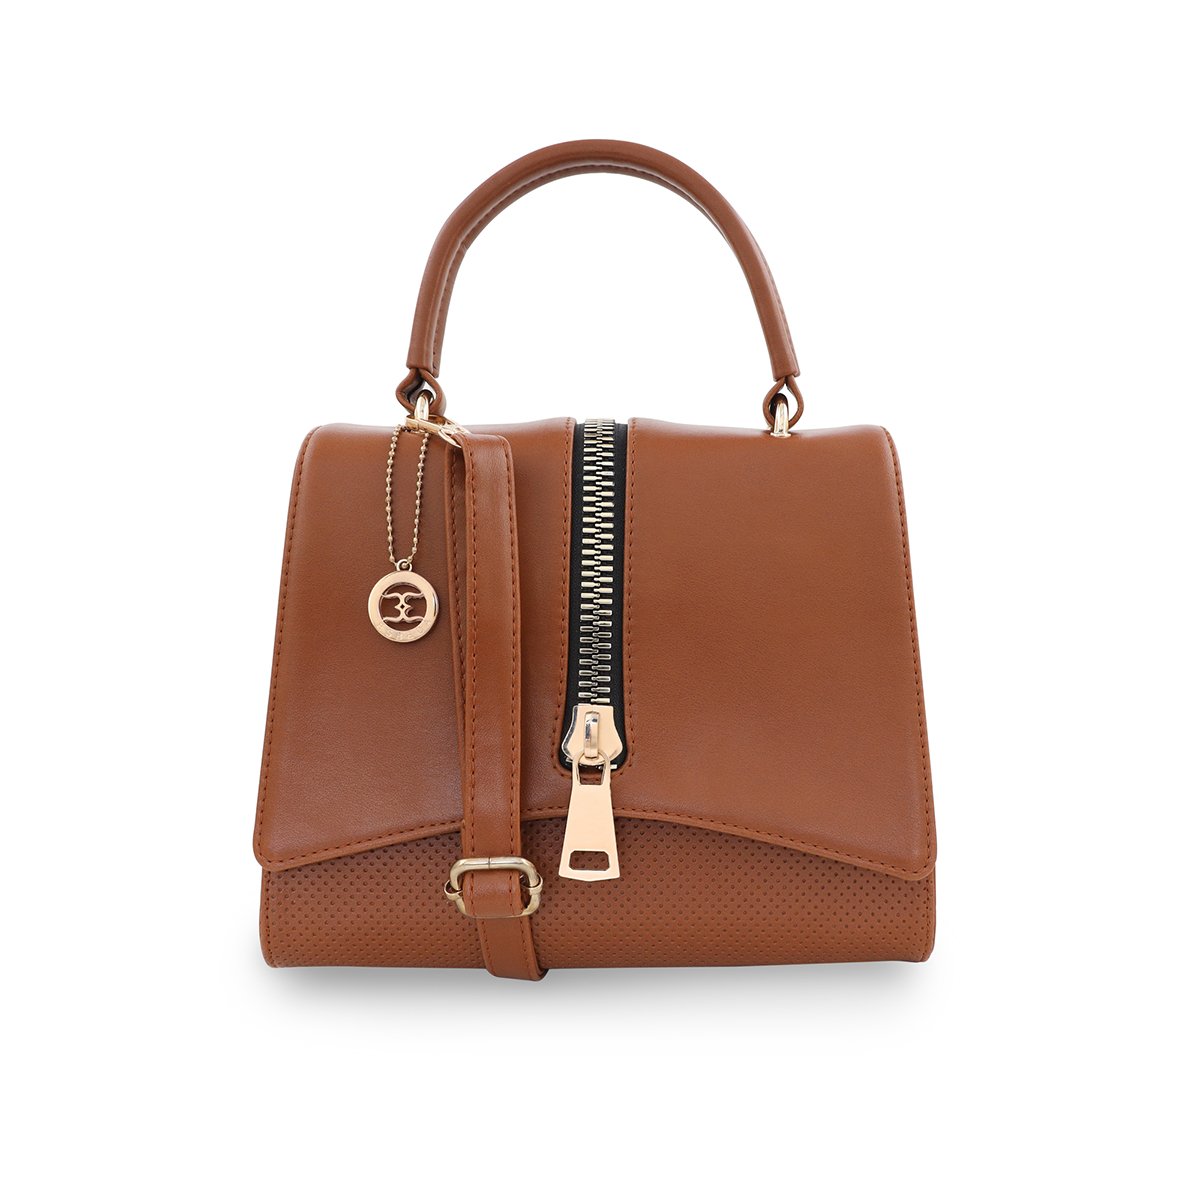 ESBEDA Tan Brown Sling Bag Price in India, Full Specifications & Offers |  DTashion.com